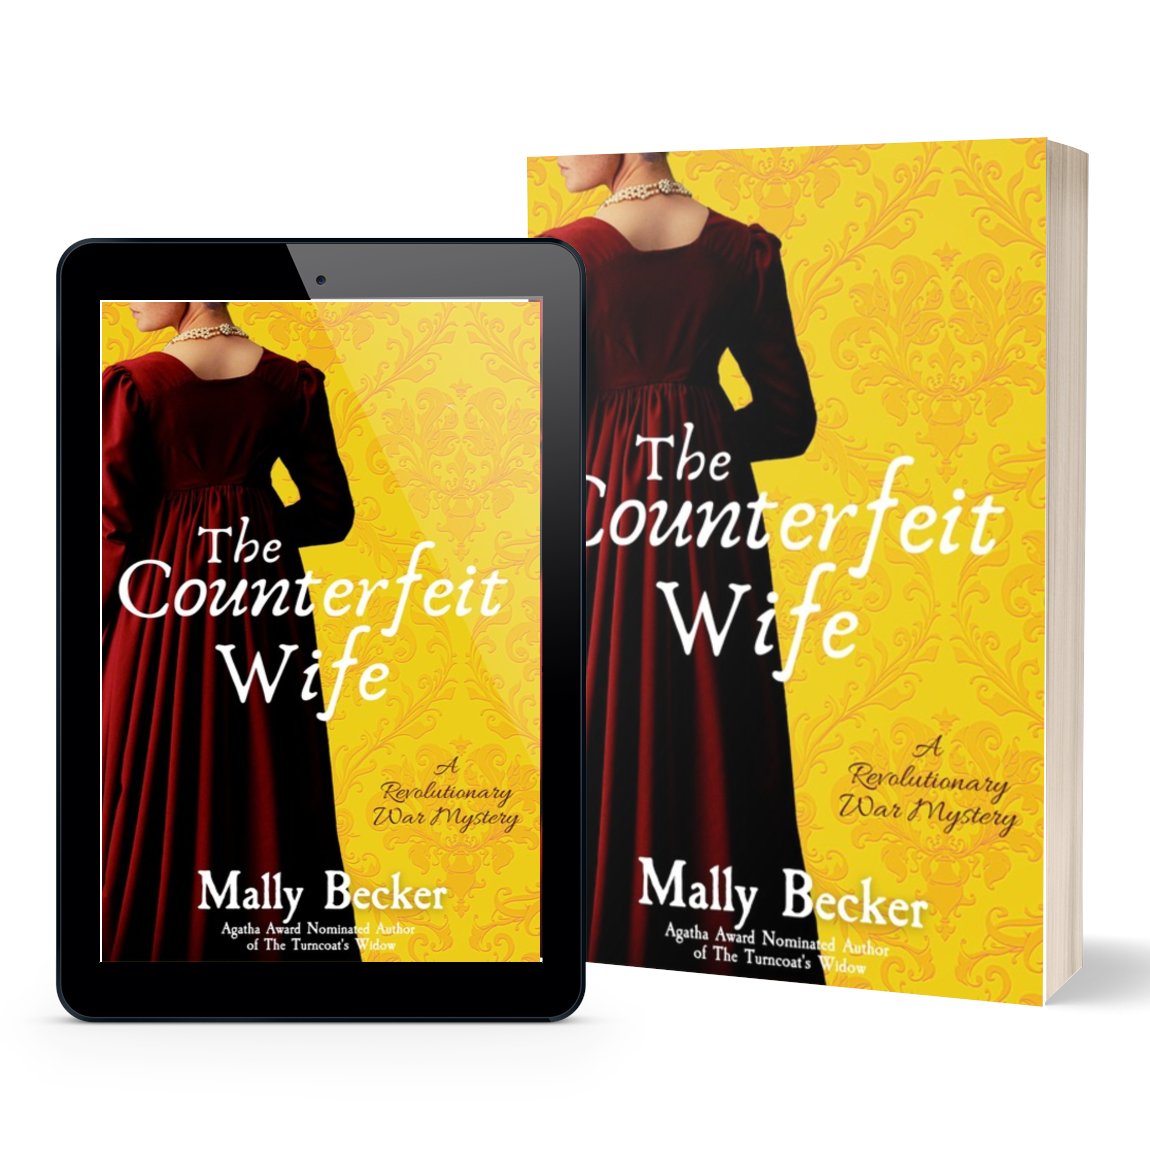 #MallyBecker recently visited @KatreaderKJK to talk about her #book The Counterfeit Wife - Check out this #AuthorInterview & #BookExcerpt bit.ly/3TKKdnG | @mally_becker #Mystery @LevelBestBooks #whattoreadnext #RevolutionaryWar #bookreader #bookishlove #greatreads